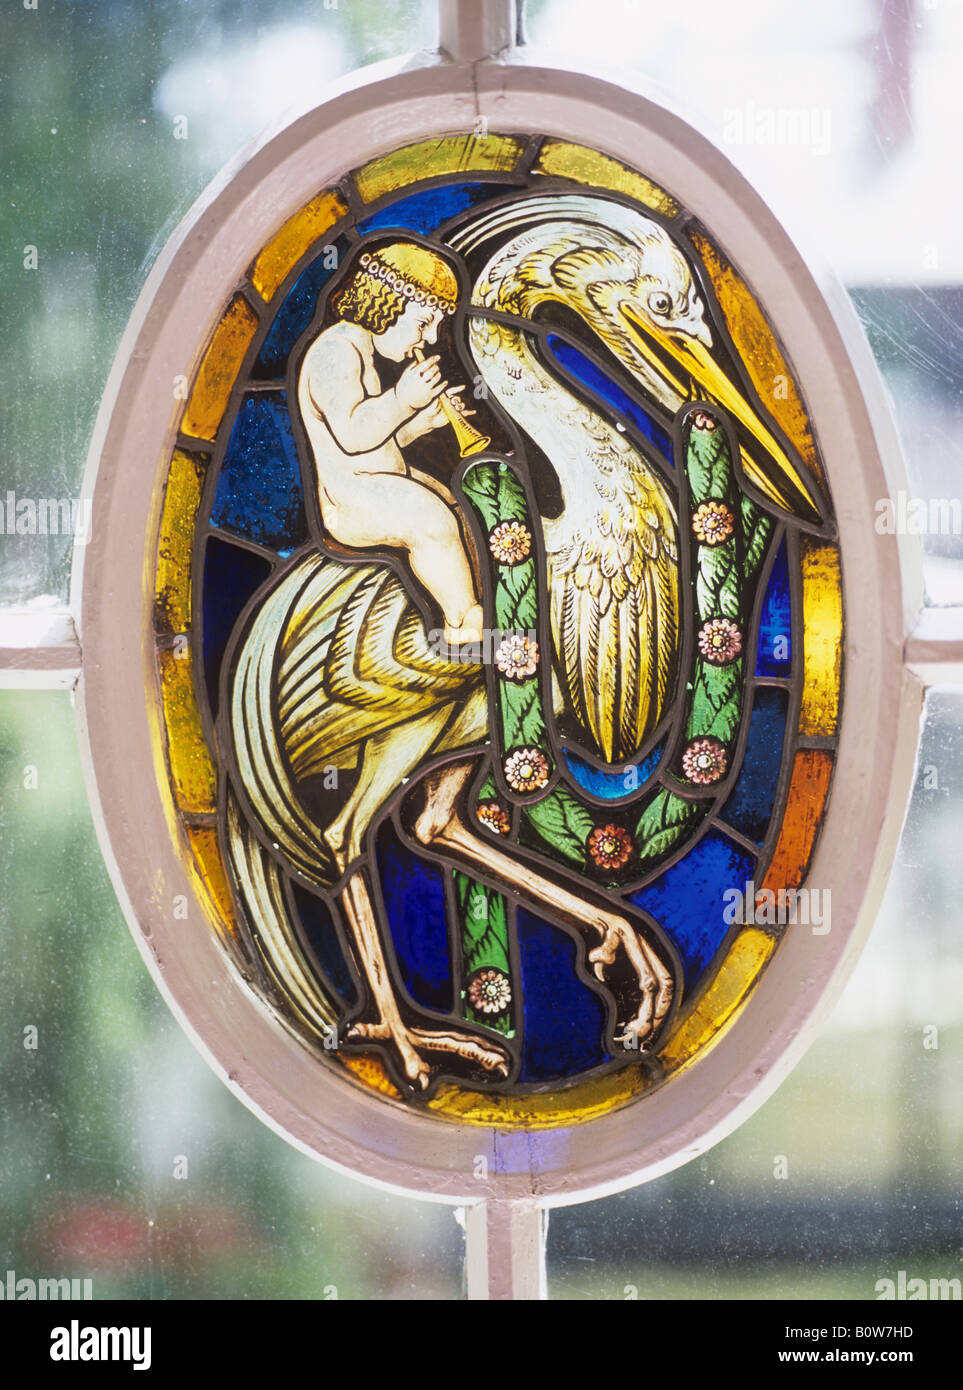 Stained glass art in a window, Bavaria, Germany Stock Photo